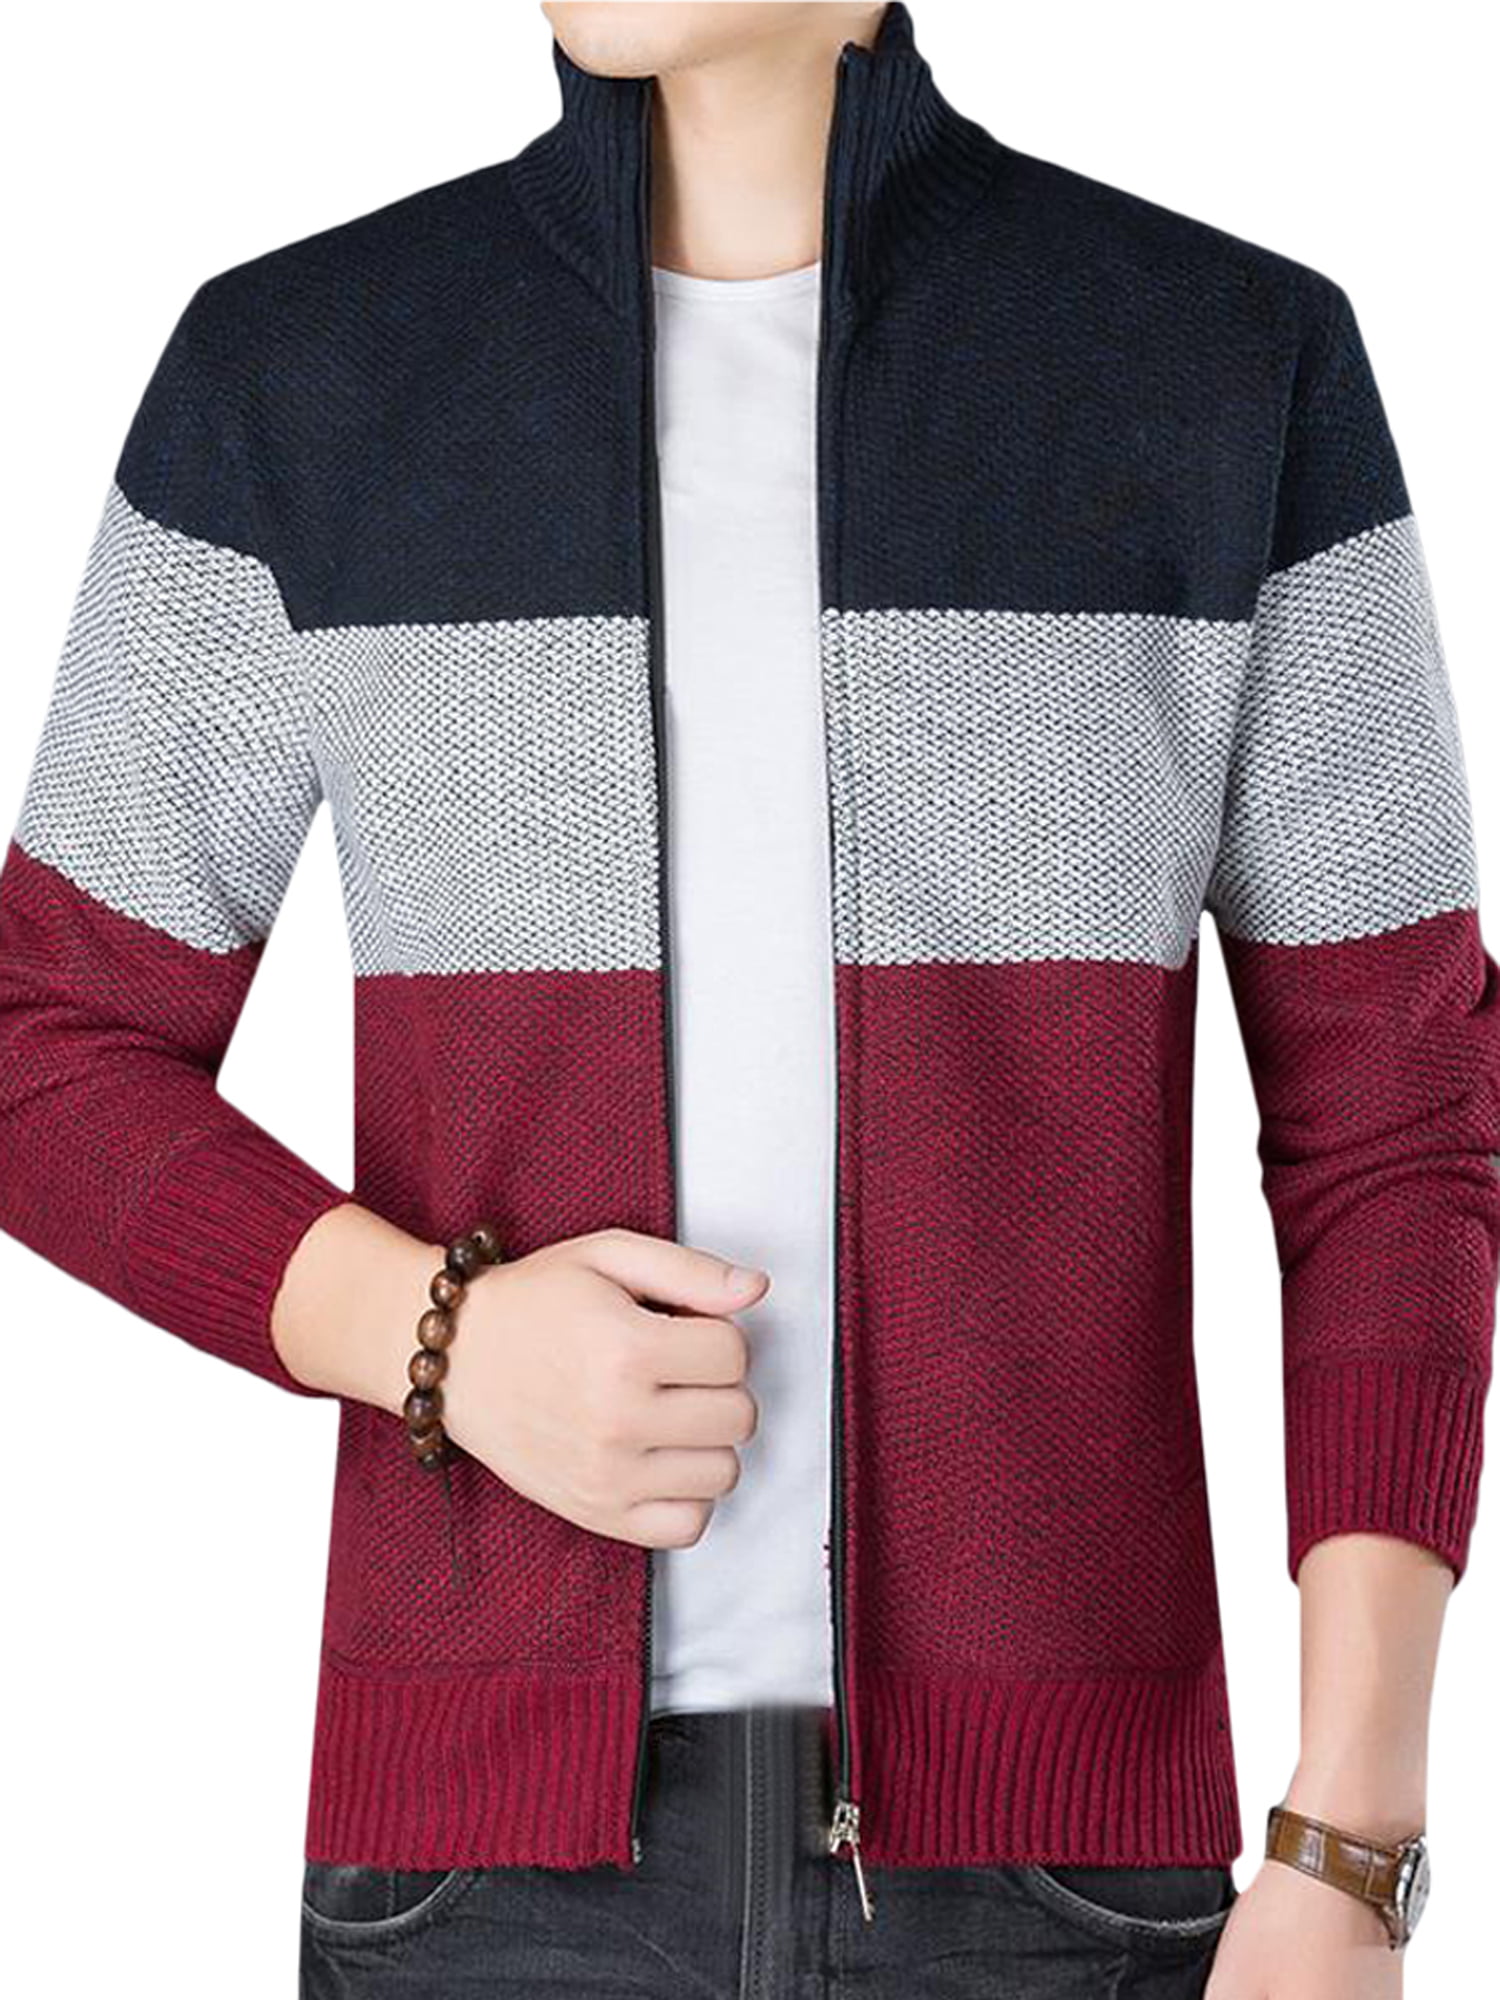 ouxiuli Mens Pullover Jumper Knitted Camo Printed High Neck Top Casual Sweaters